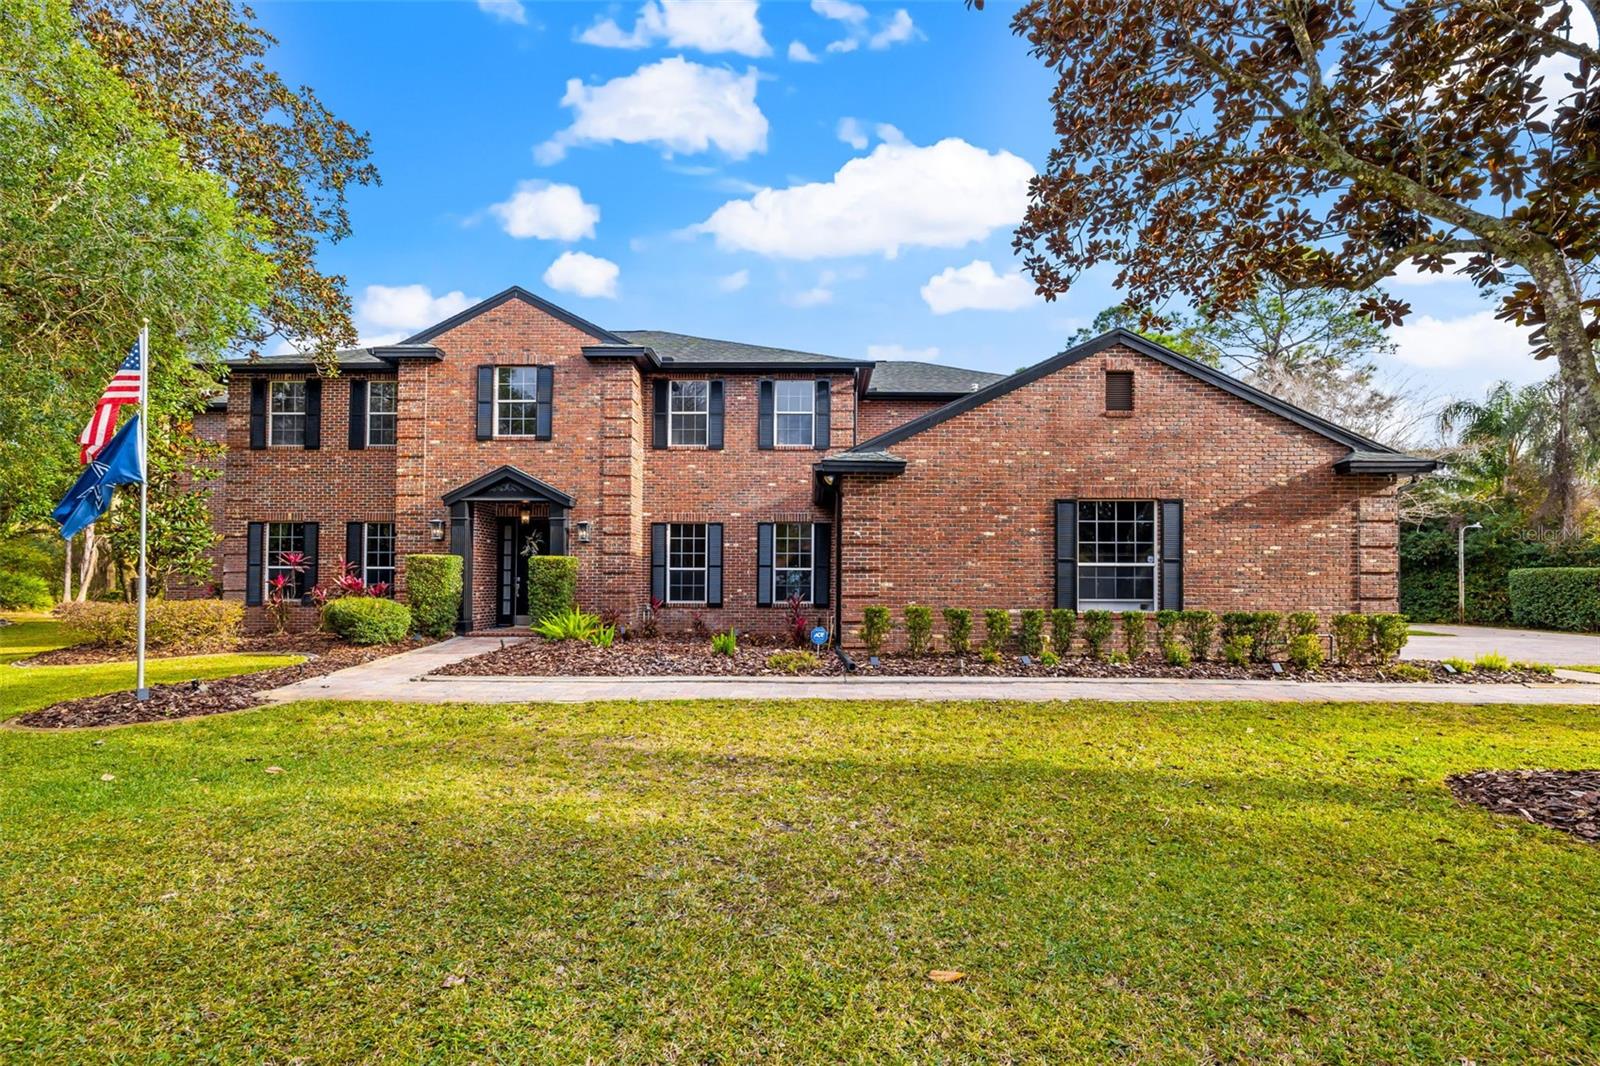 Welcome to 2982 Cypress Pointe Ct, a stunning 5-bedroom, 3 full bath, and 2 half bath residence.